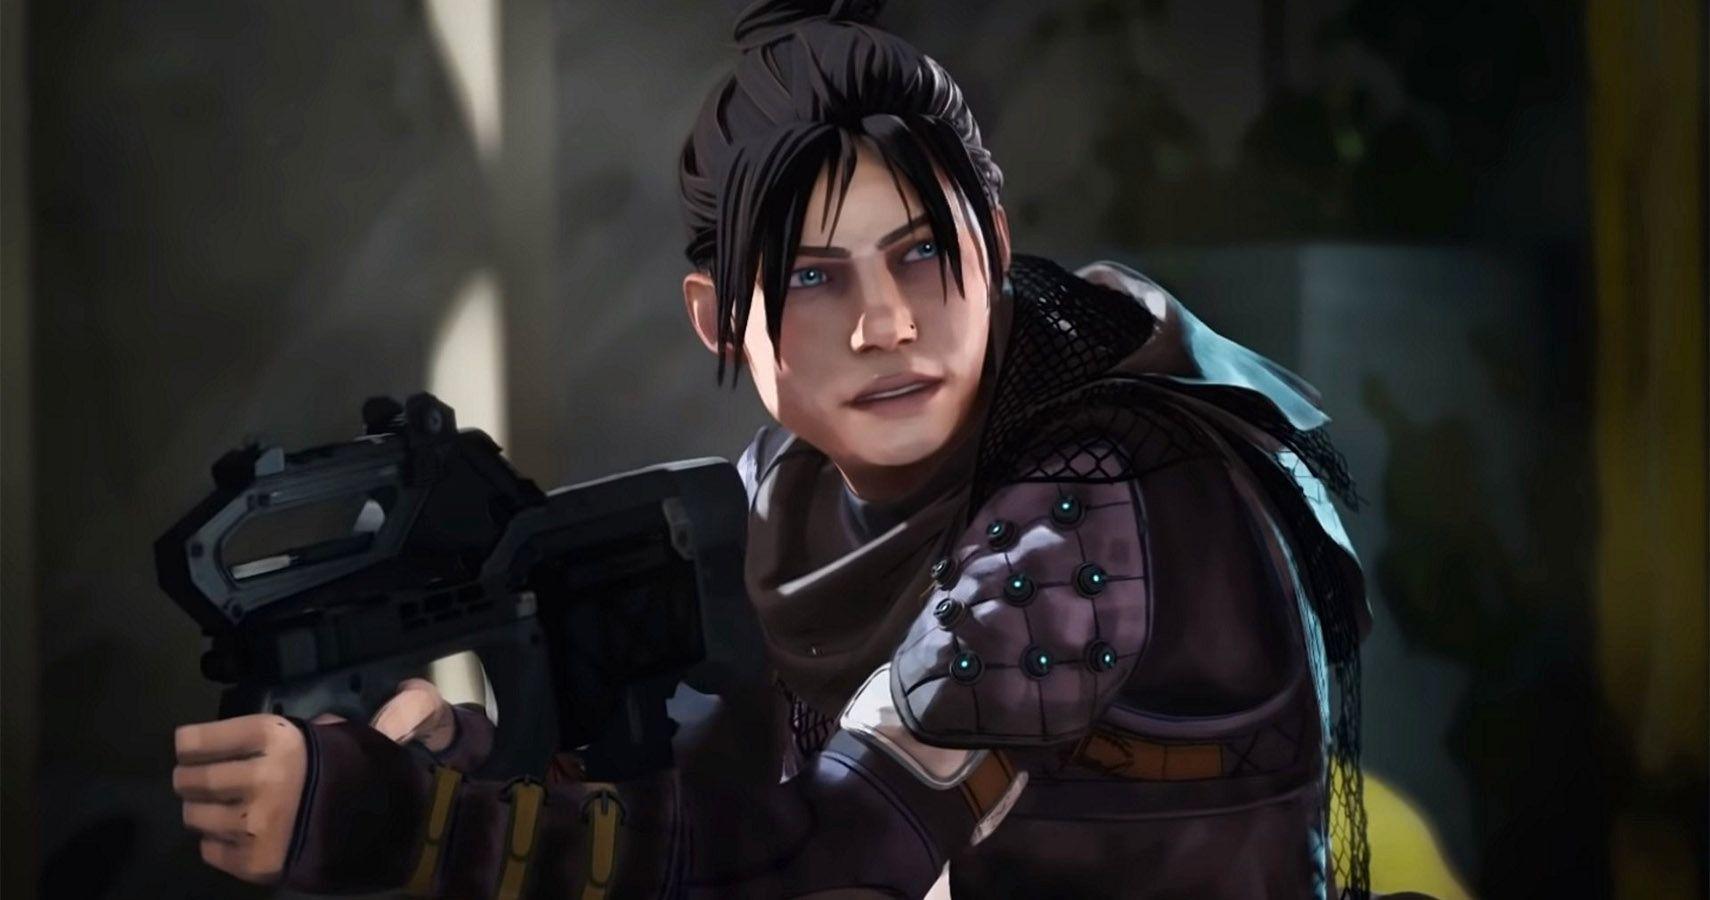 Wraith may finally be a little more balance in Apex Legends after the Lost Treasures update.